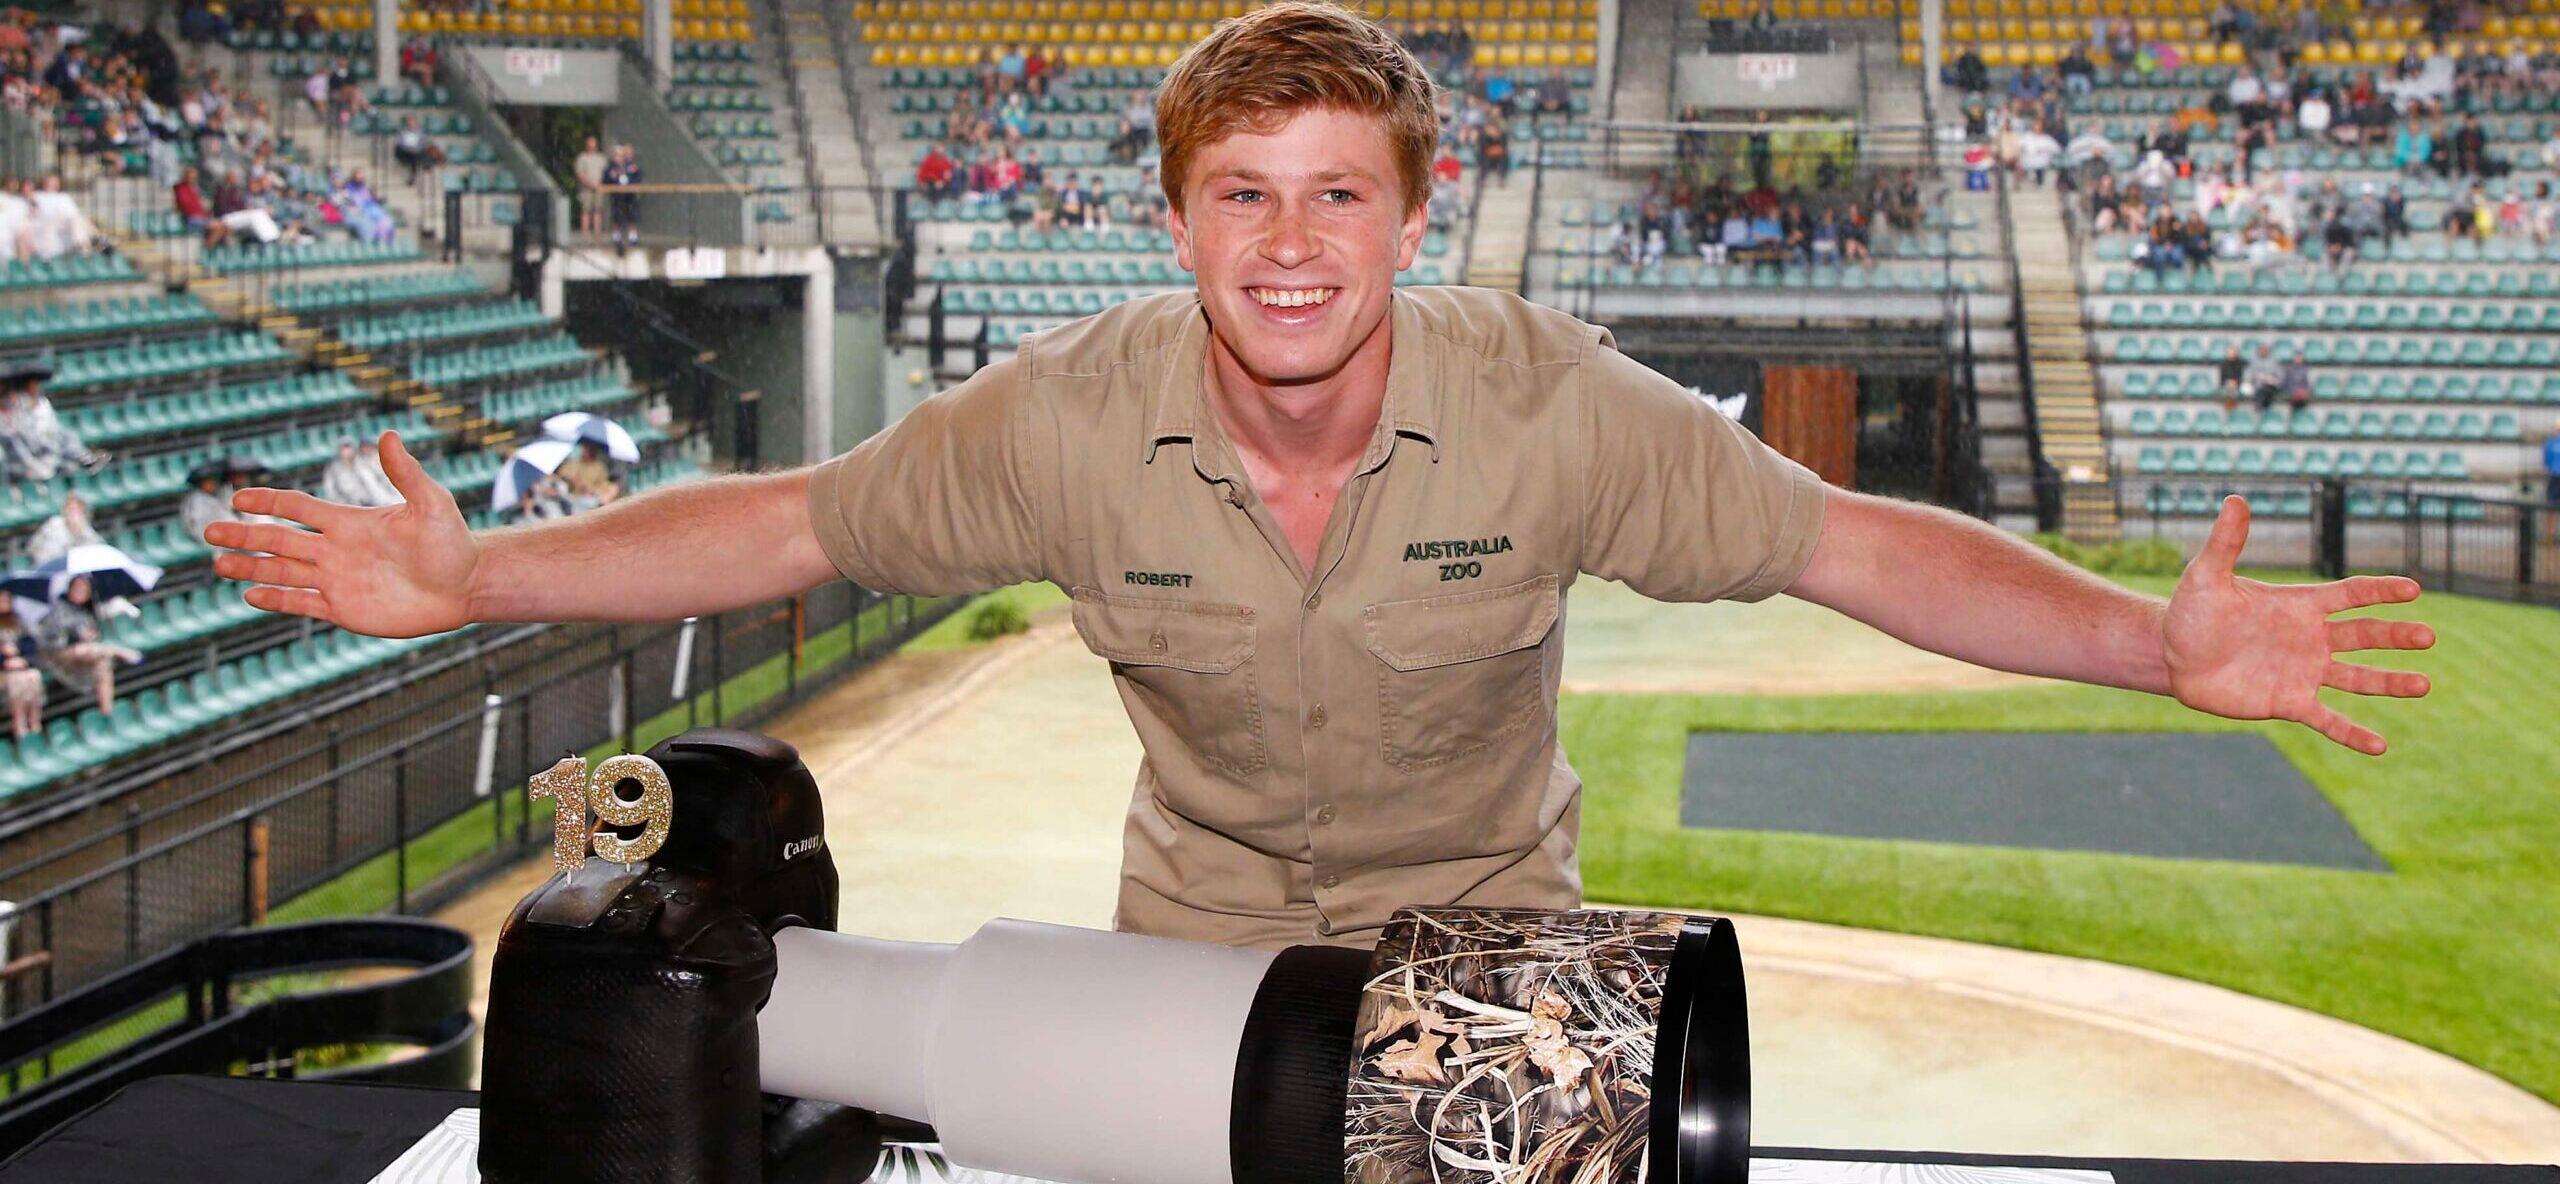 Robert Irwin Shares Australia Zoo ‘Highlight’ Connected To His Late Father